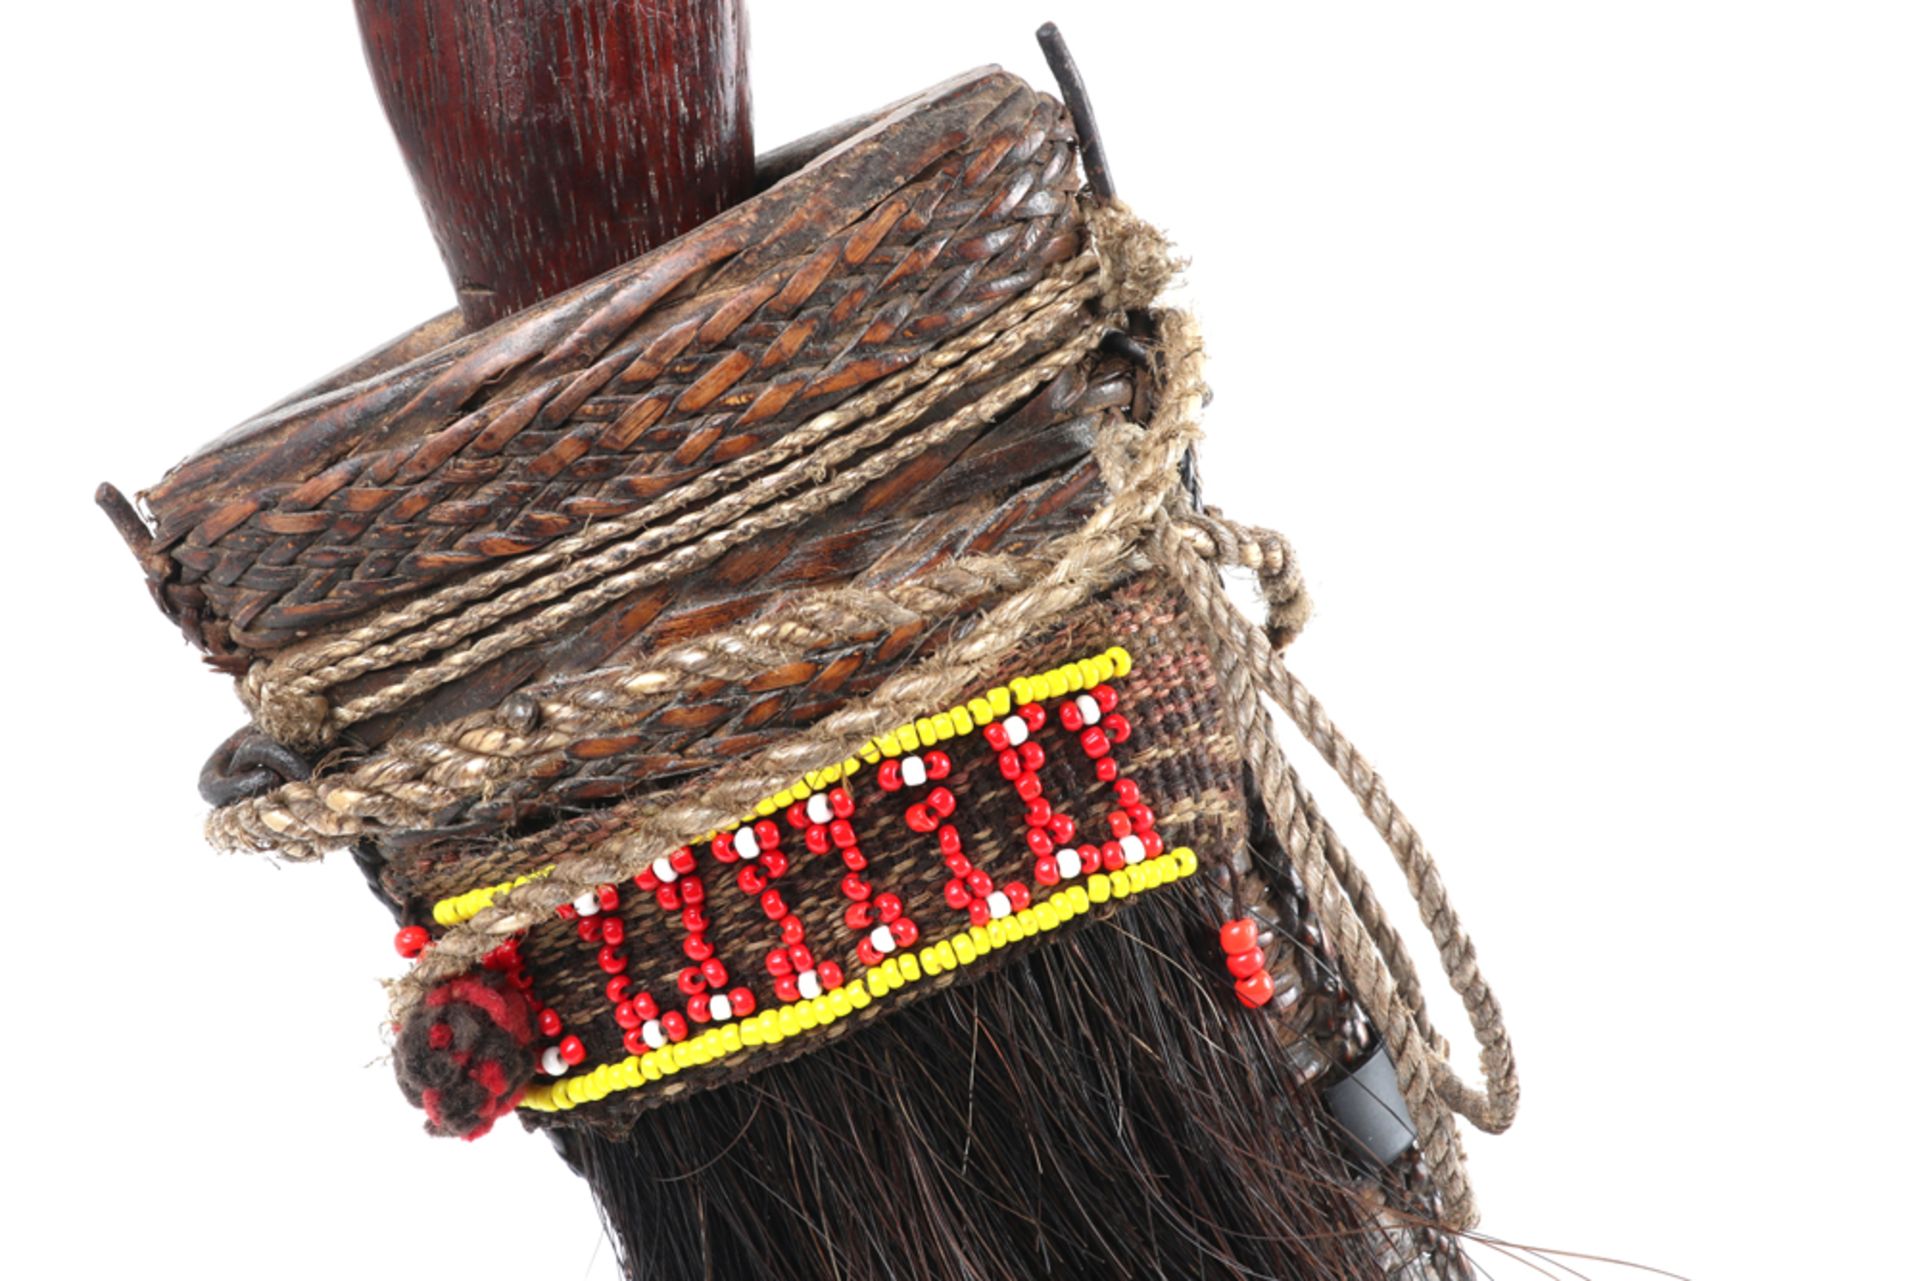 Nepalese Gurka dagger with sheath in fibres and metal adorned with pearls || Nepalese dolk van de - Image 4 of 4